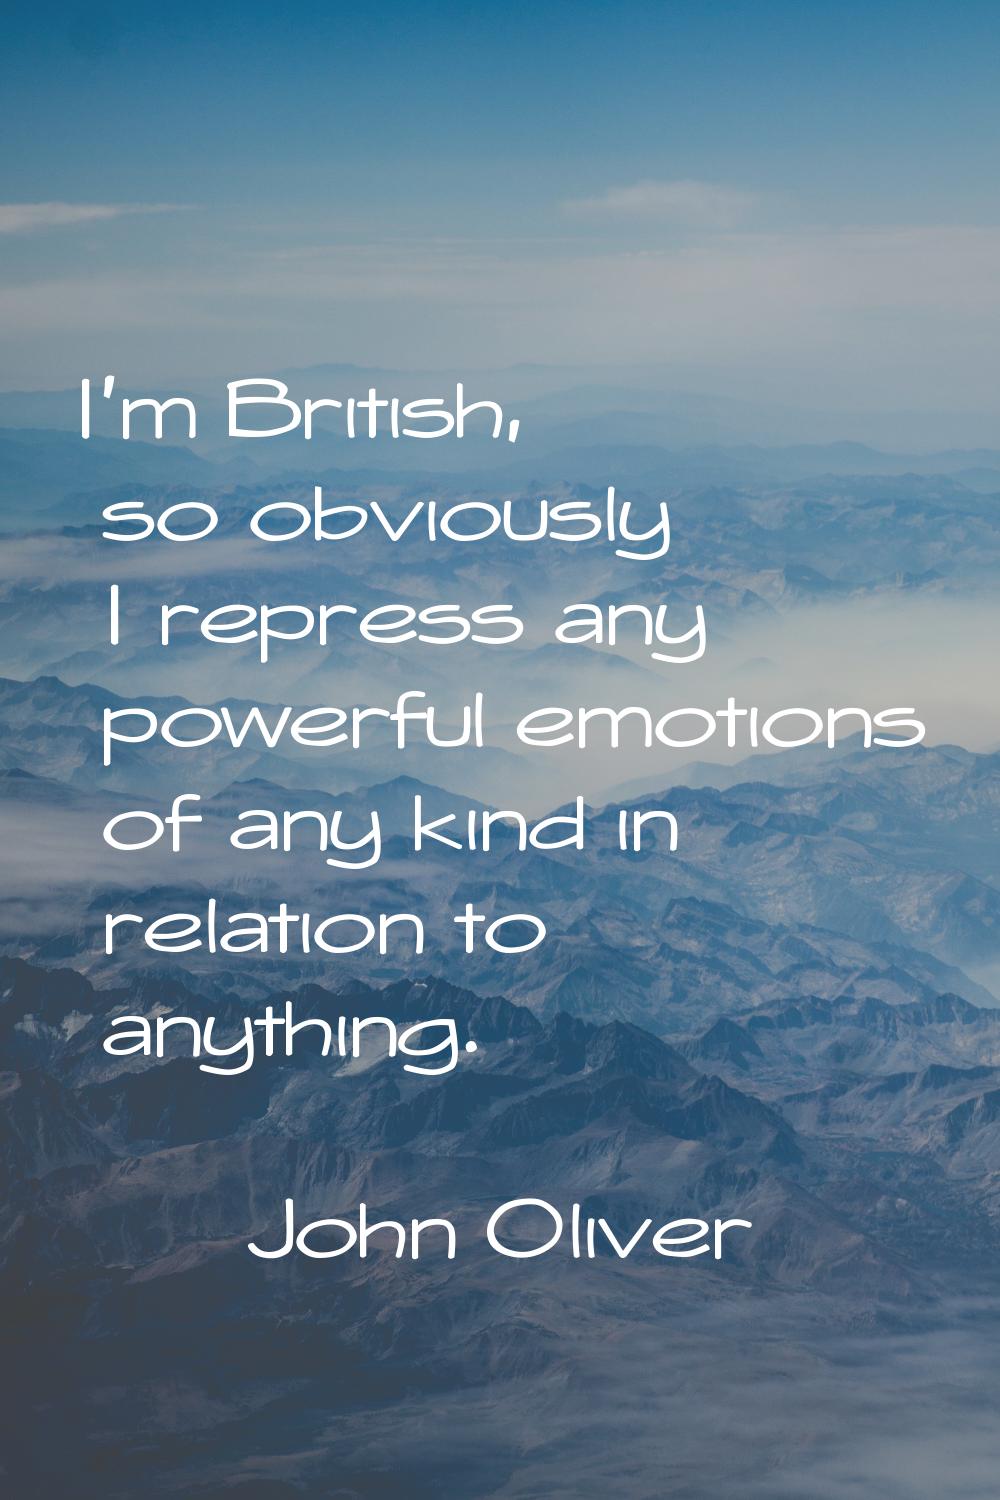 I'm British, so obviously I repress any powerful emotions of any kind in relation to anything.